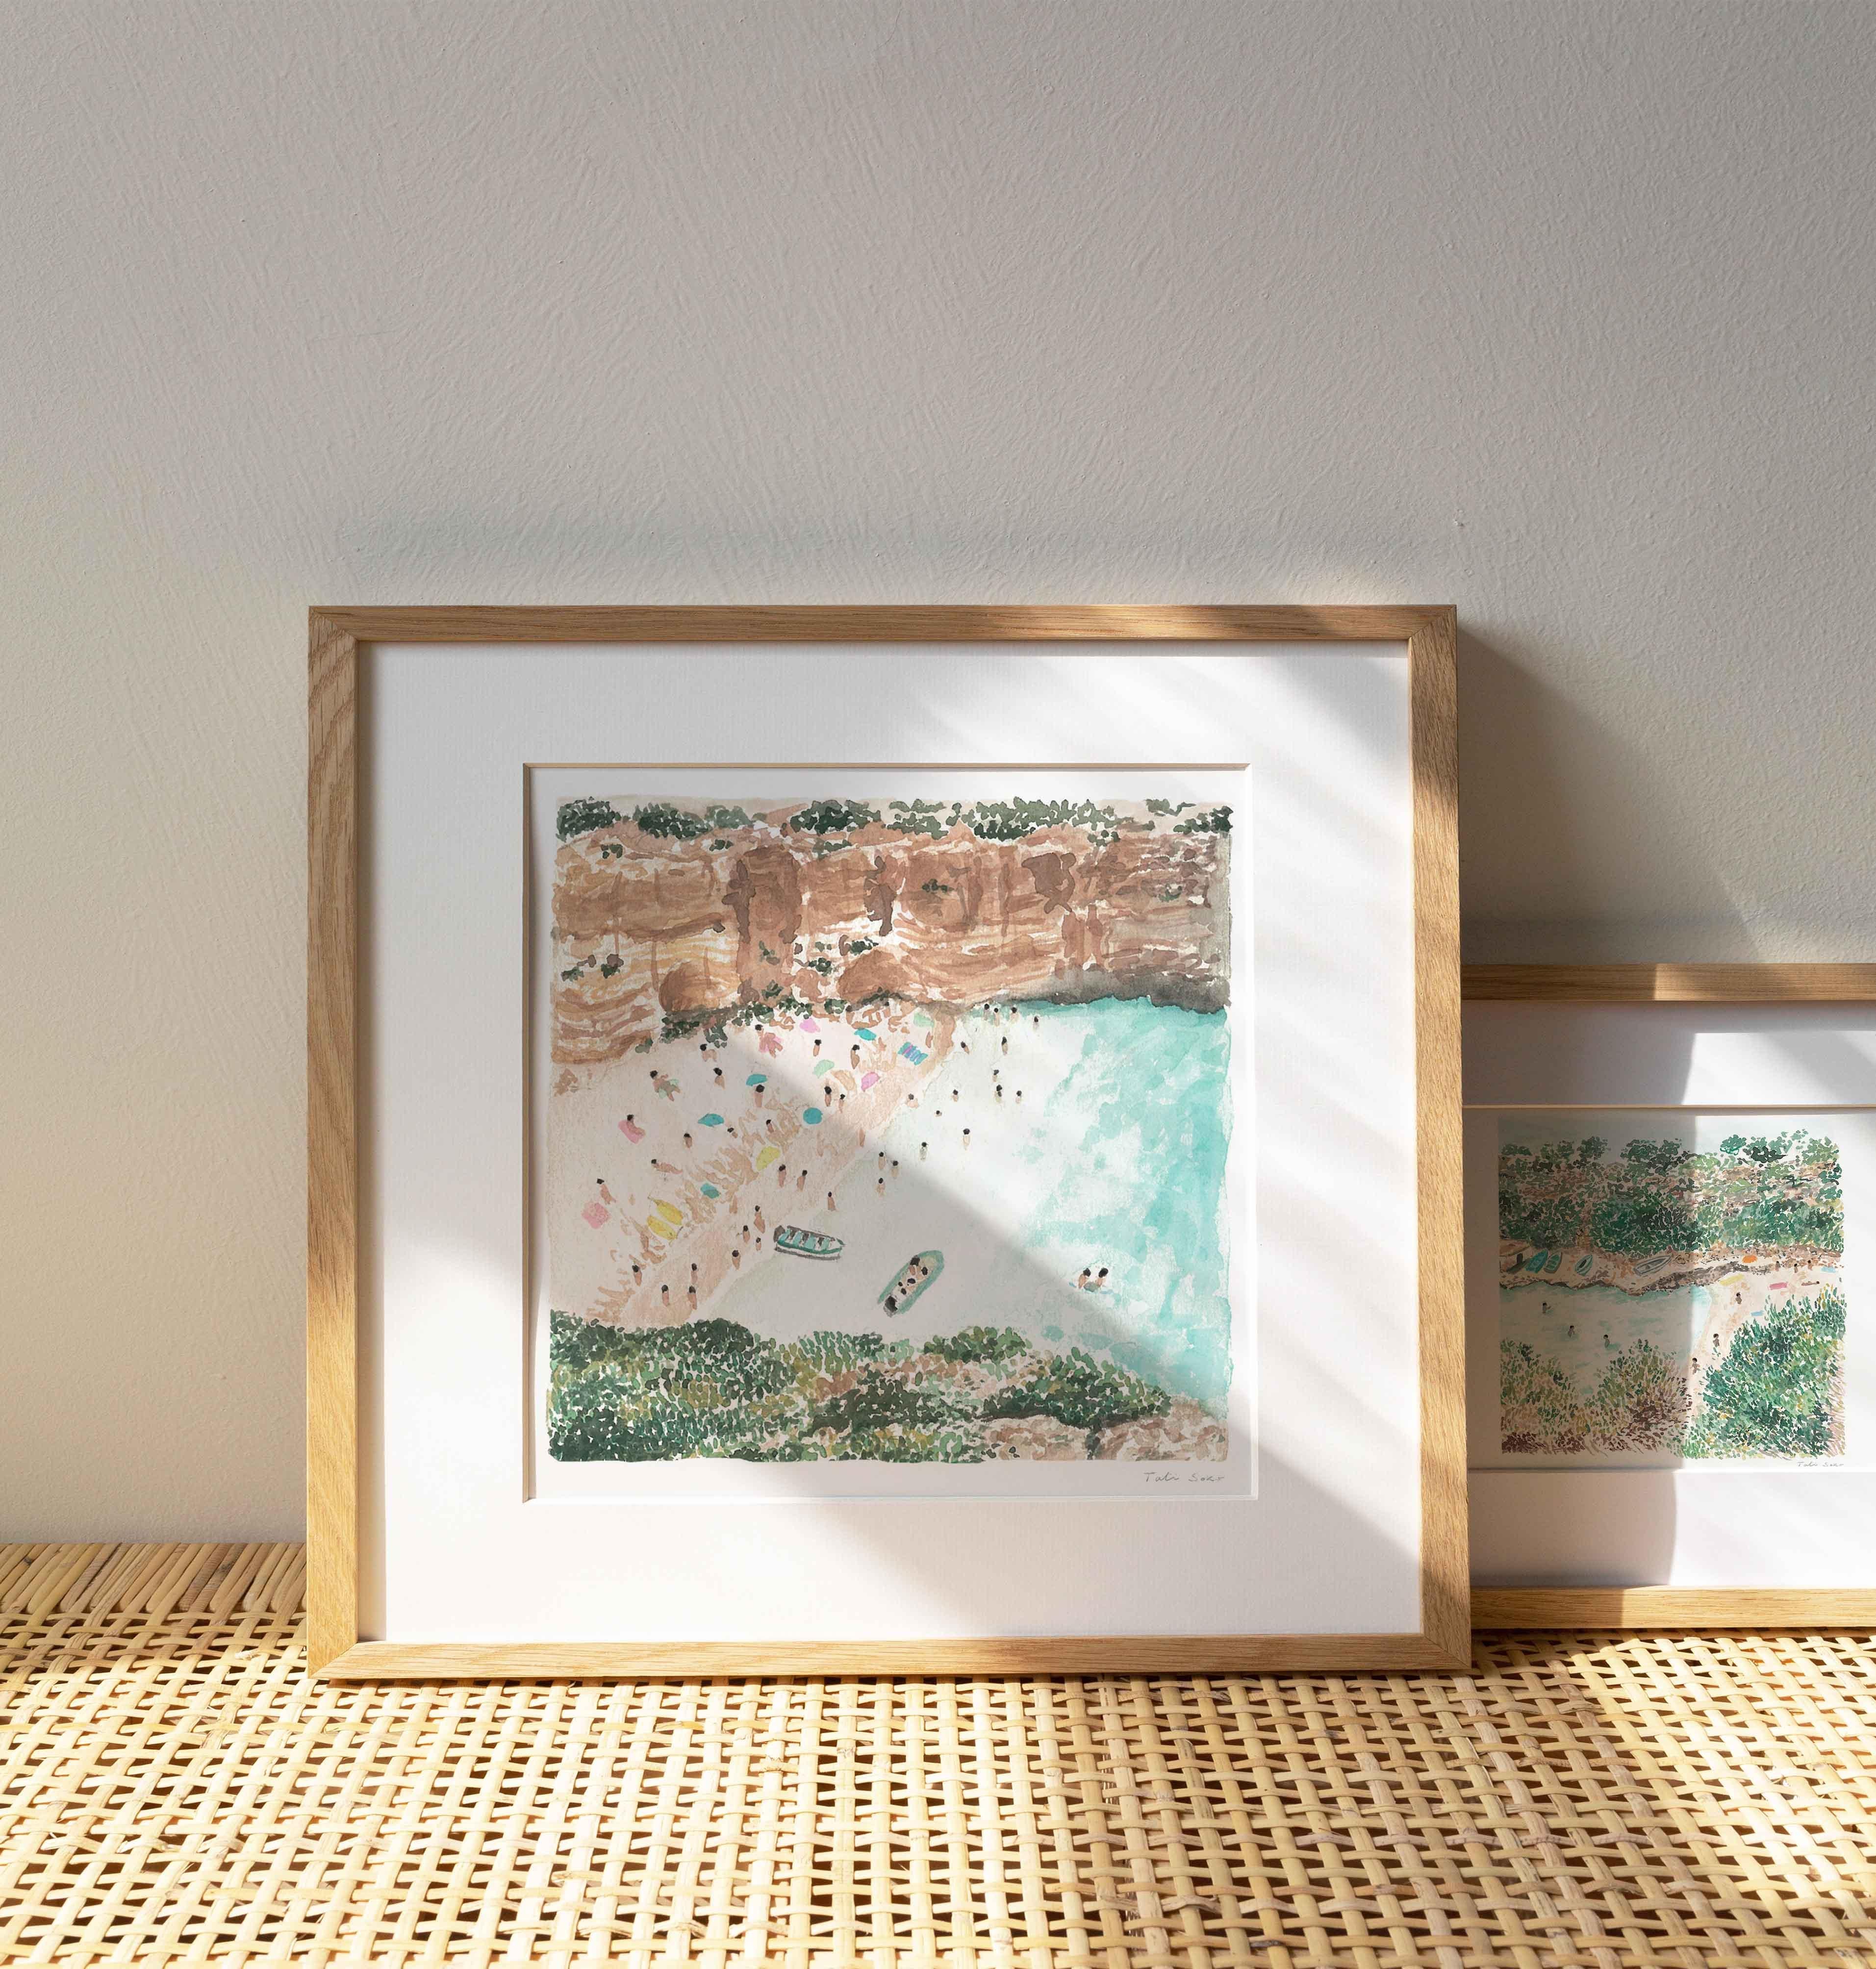 Ericeira
Original Figurative Watercolor on Archival Cotton Paper
This figurative watercolor painting comes to life, transporting us to the sun-drenched shores of a pristine beach against the azure embrace of the Mediterranean Sea. This captivating